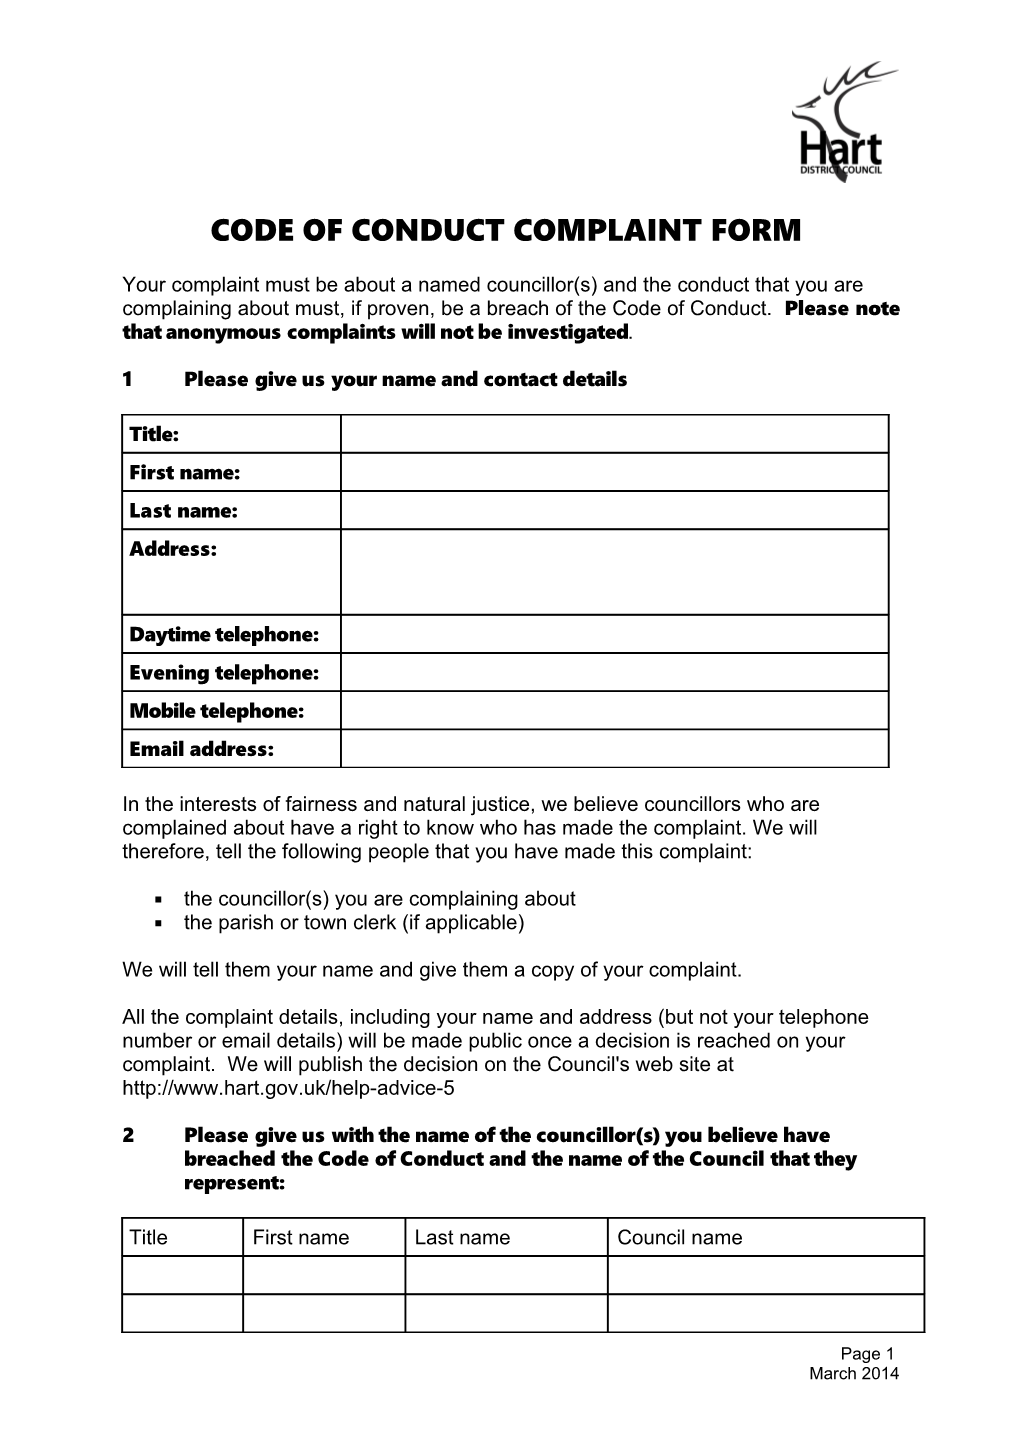 Code of Conduct Complaint Form